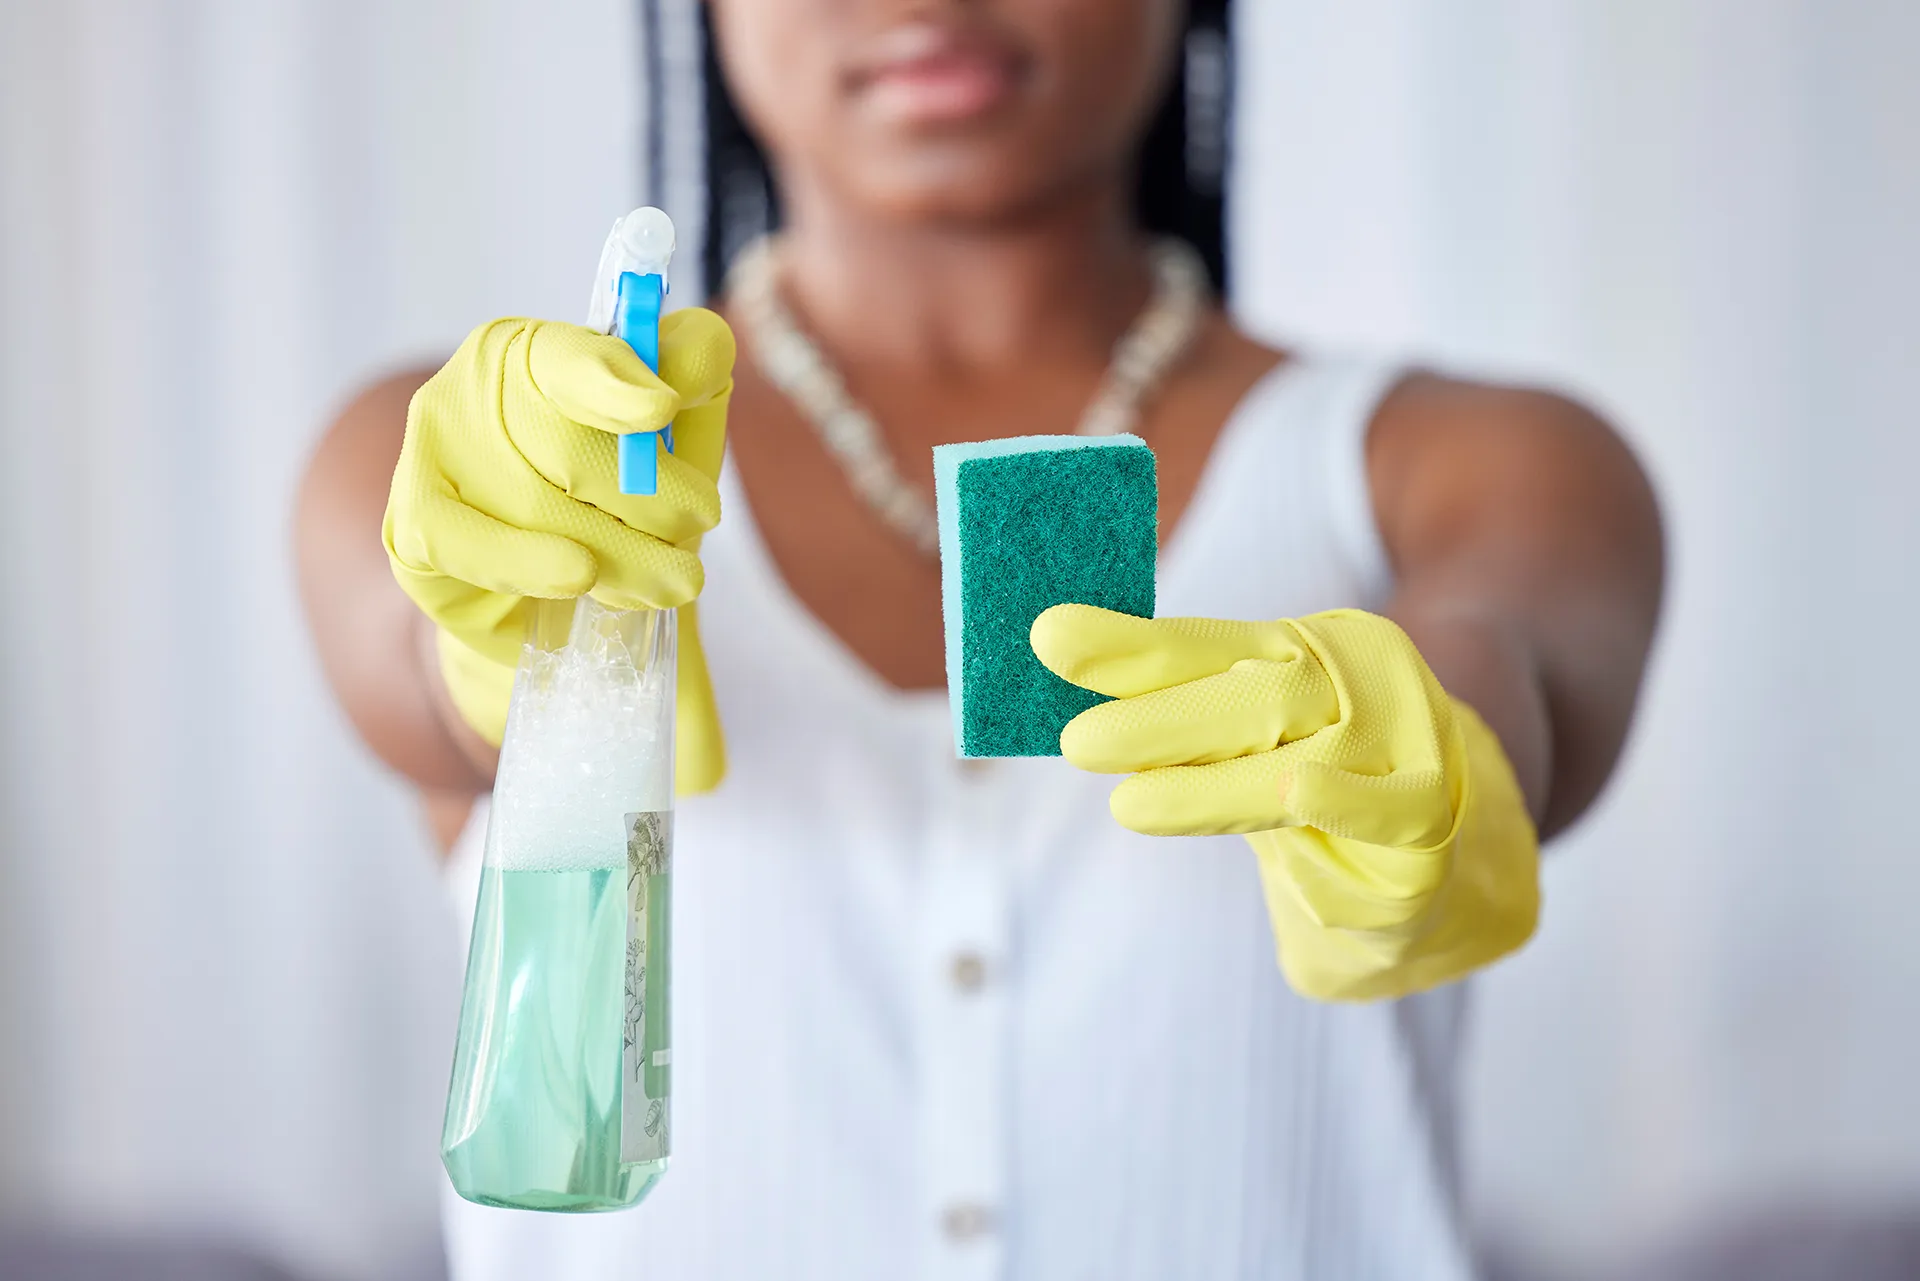 Professional Household Cleaning worker showing a spray bottle and sponge